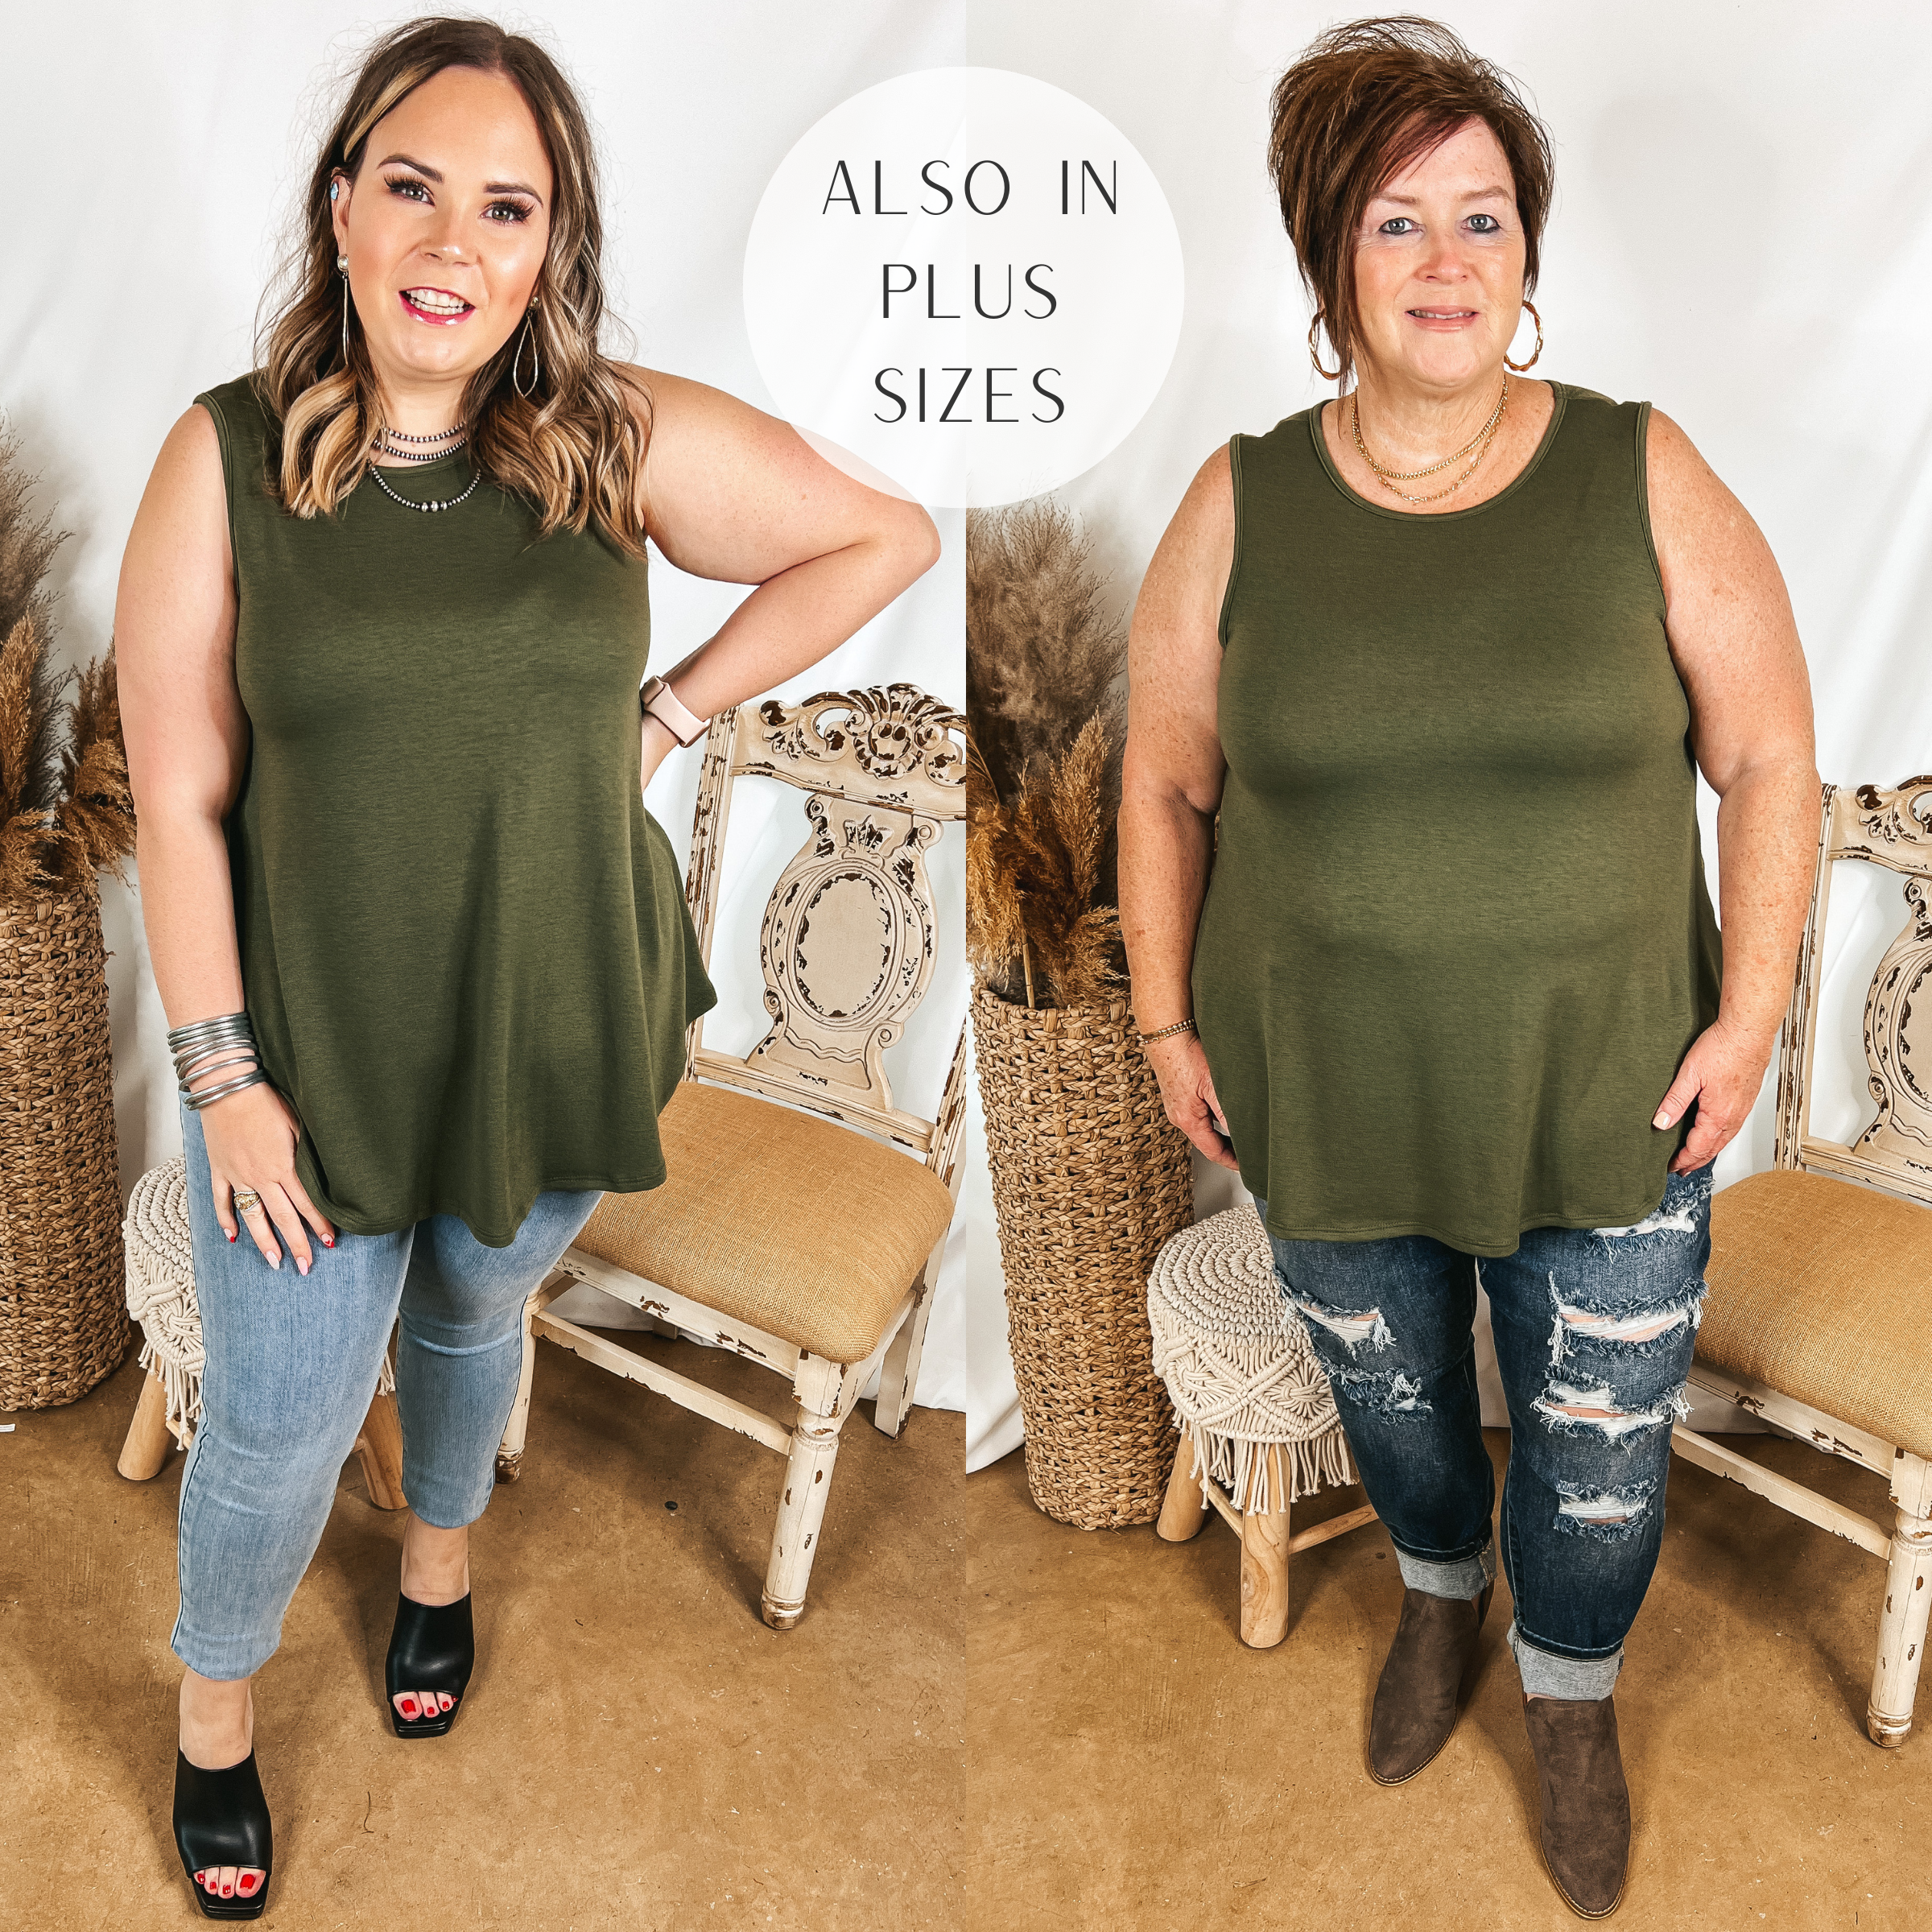 Models are wearing an olive green tank top. Size large model has it paired with light wash jeggings, black heels and silver jewelry. Plus size model has it paired with distressed boyfriend jeans, brown booties, and gold jewelry.